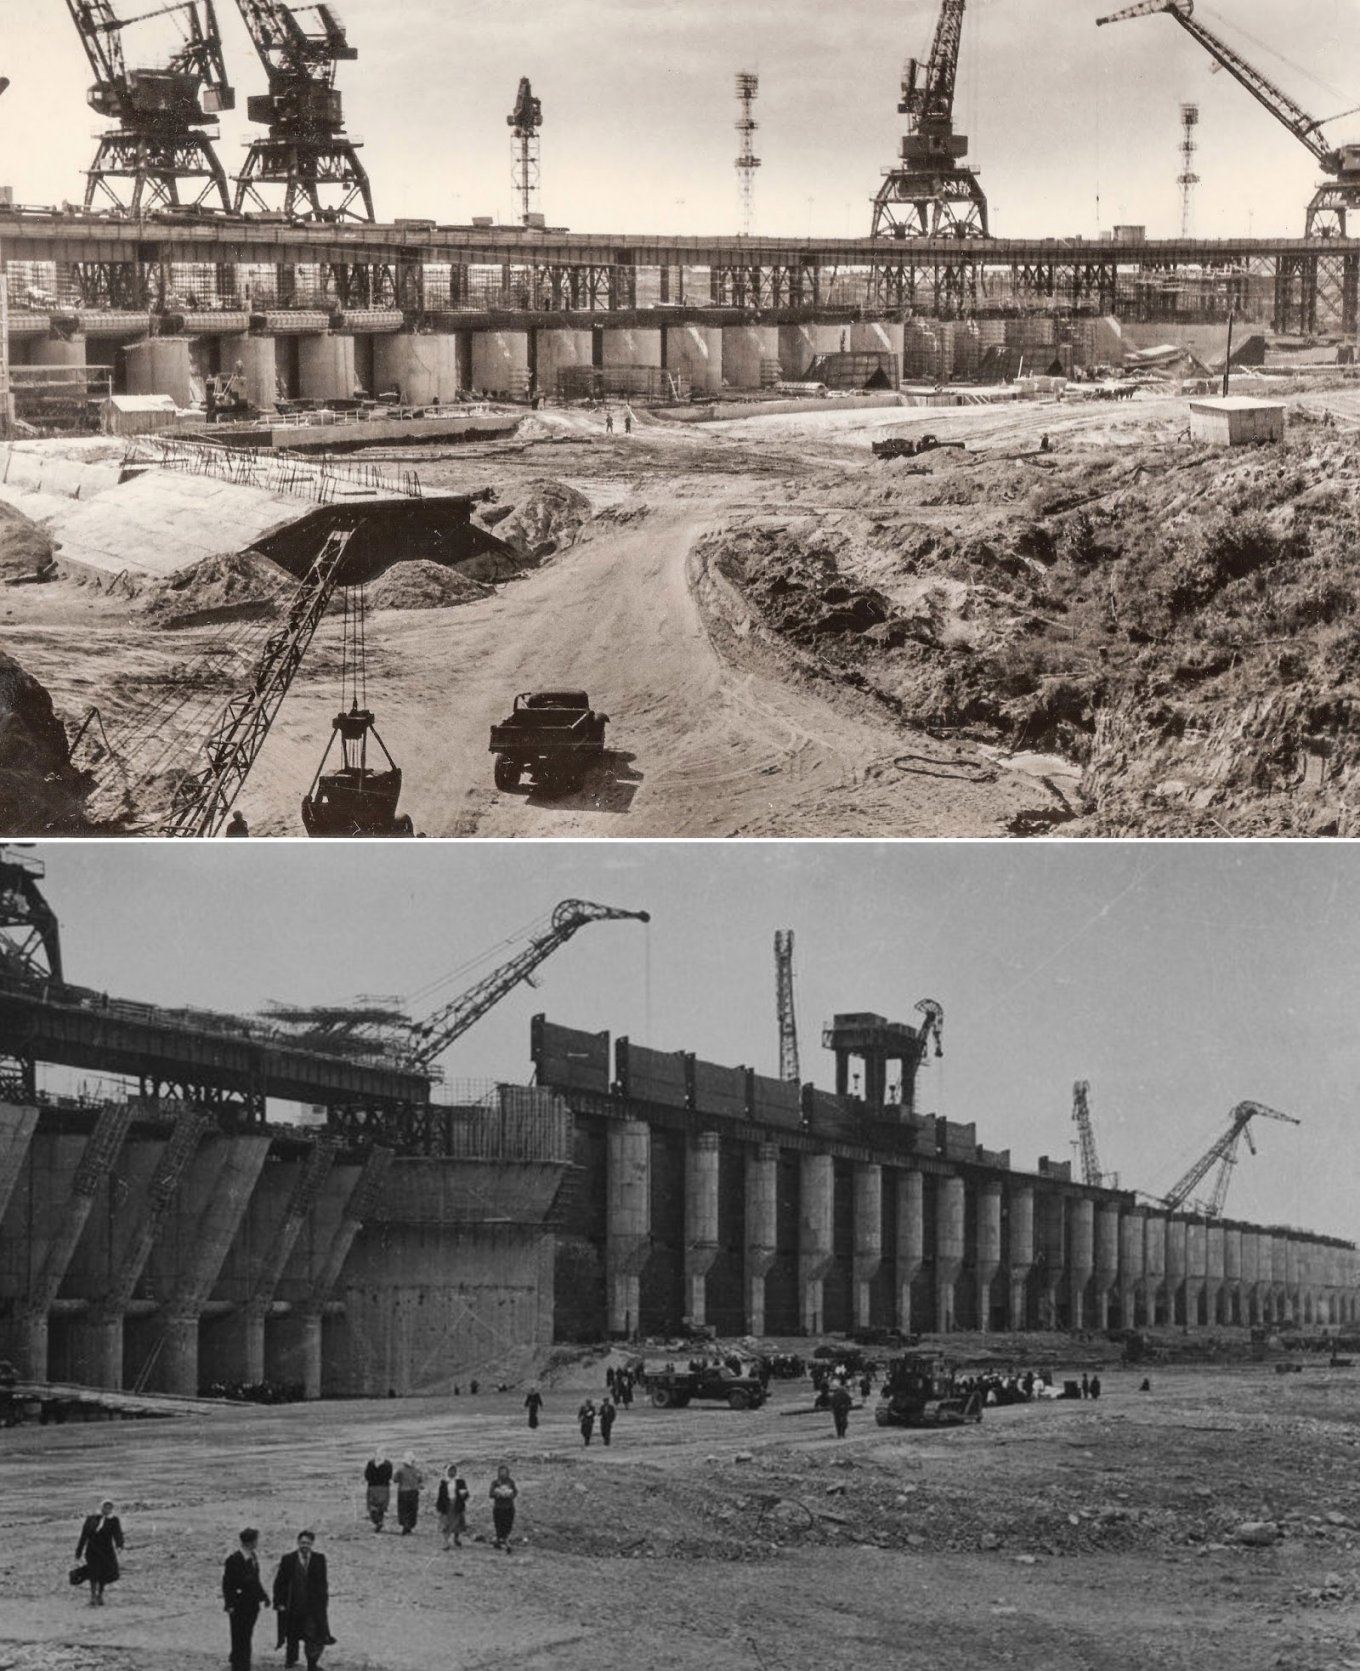 The Kakhovka Hydroelectric Power Station Defense Express Ukrhydroenergo: russian Occupation Forces Inflicted Maximum Damage to the Kakhovka Hydroelectric Power Station